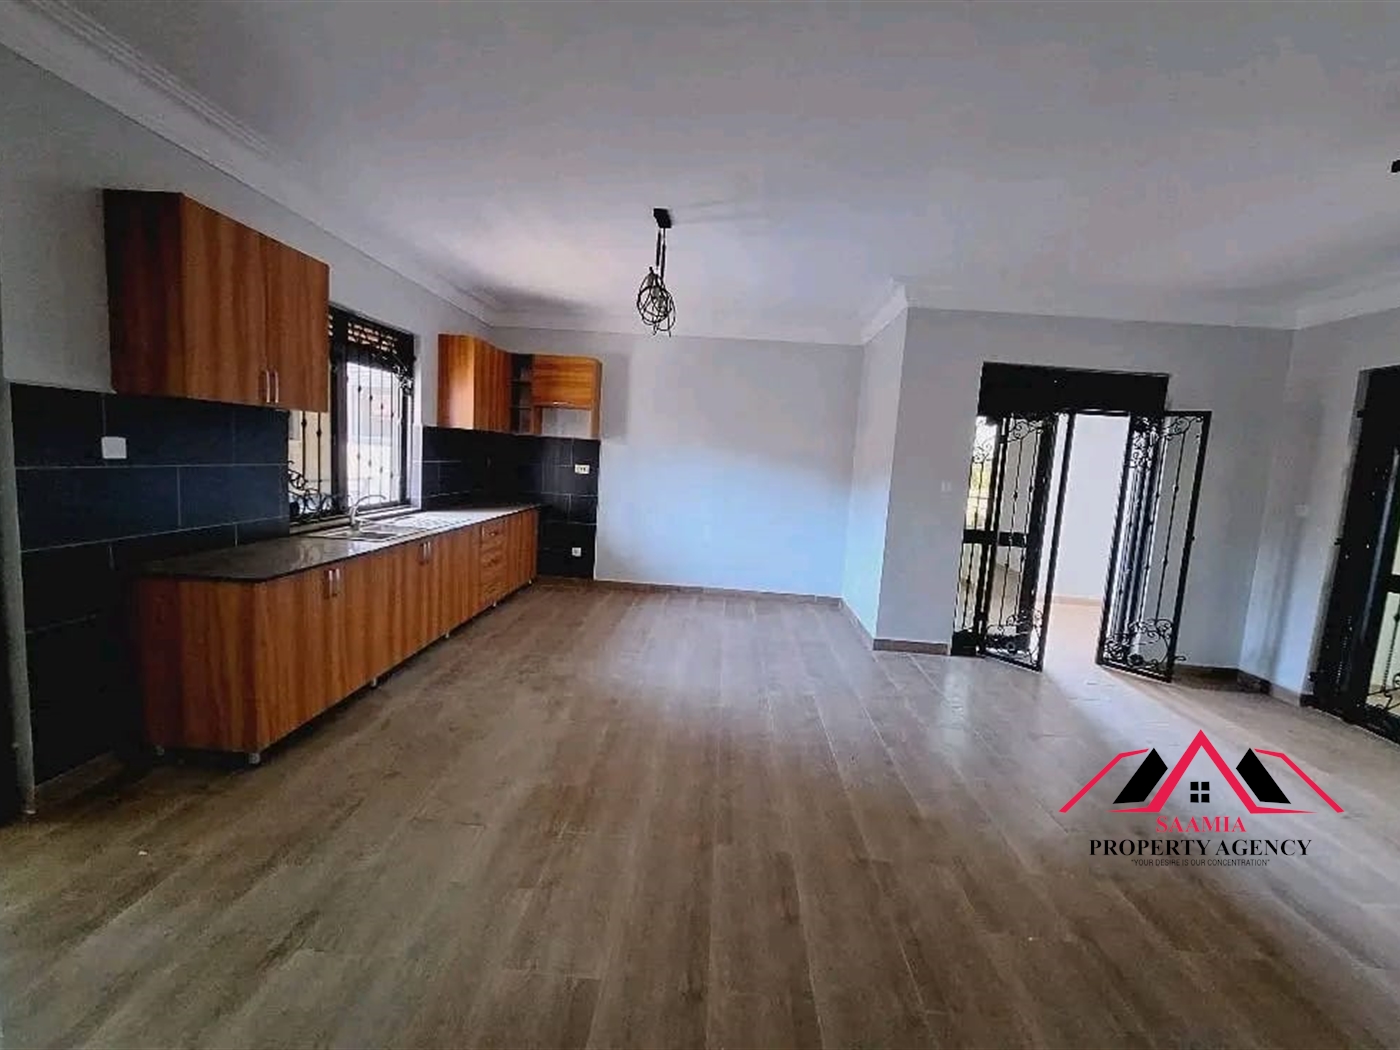 Apartment for rent in Kitatale Kampala